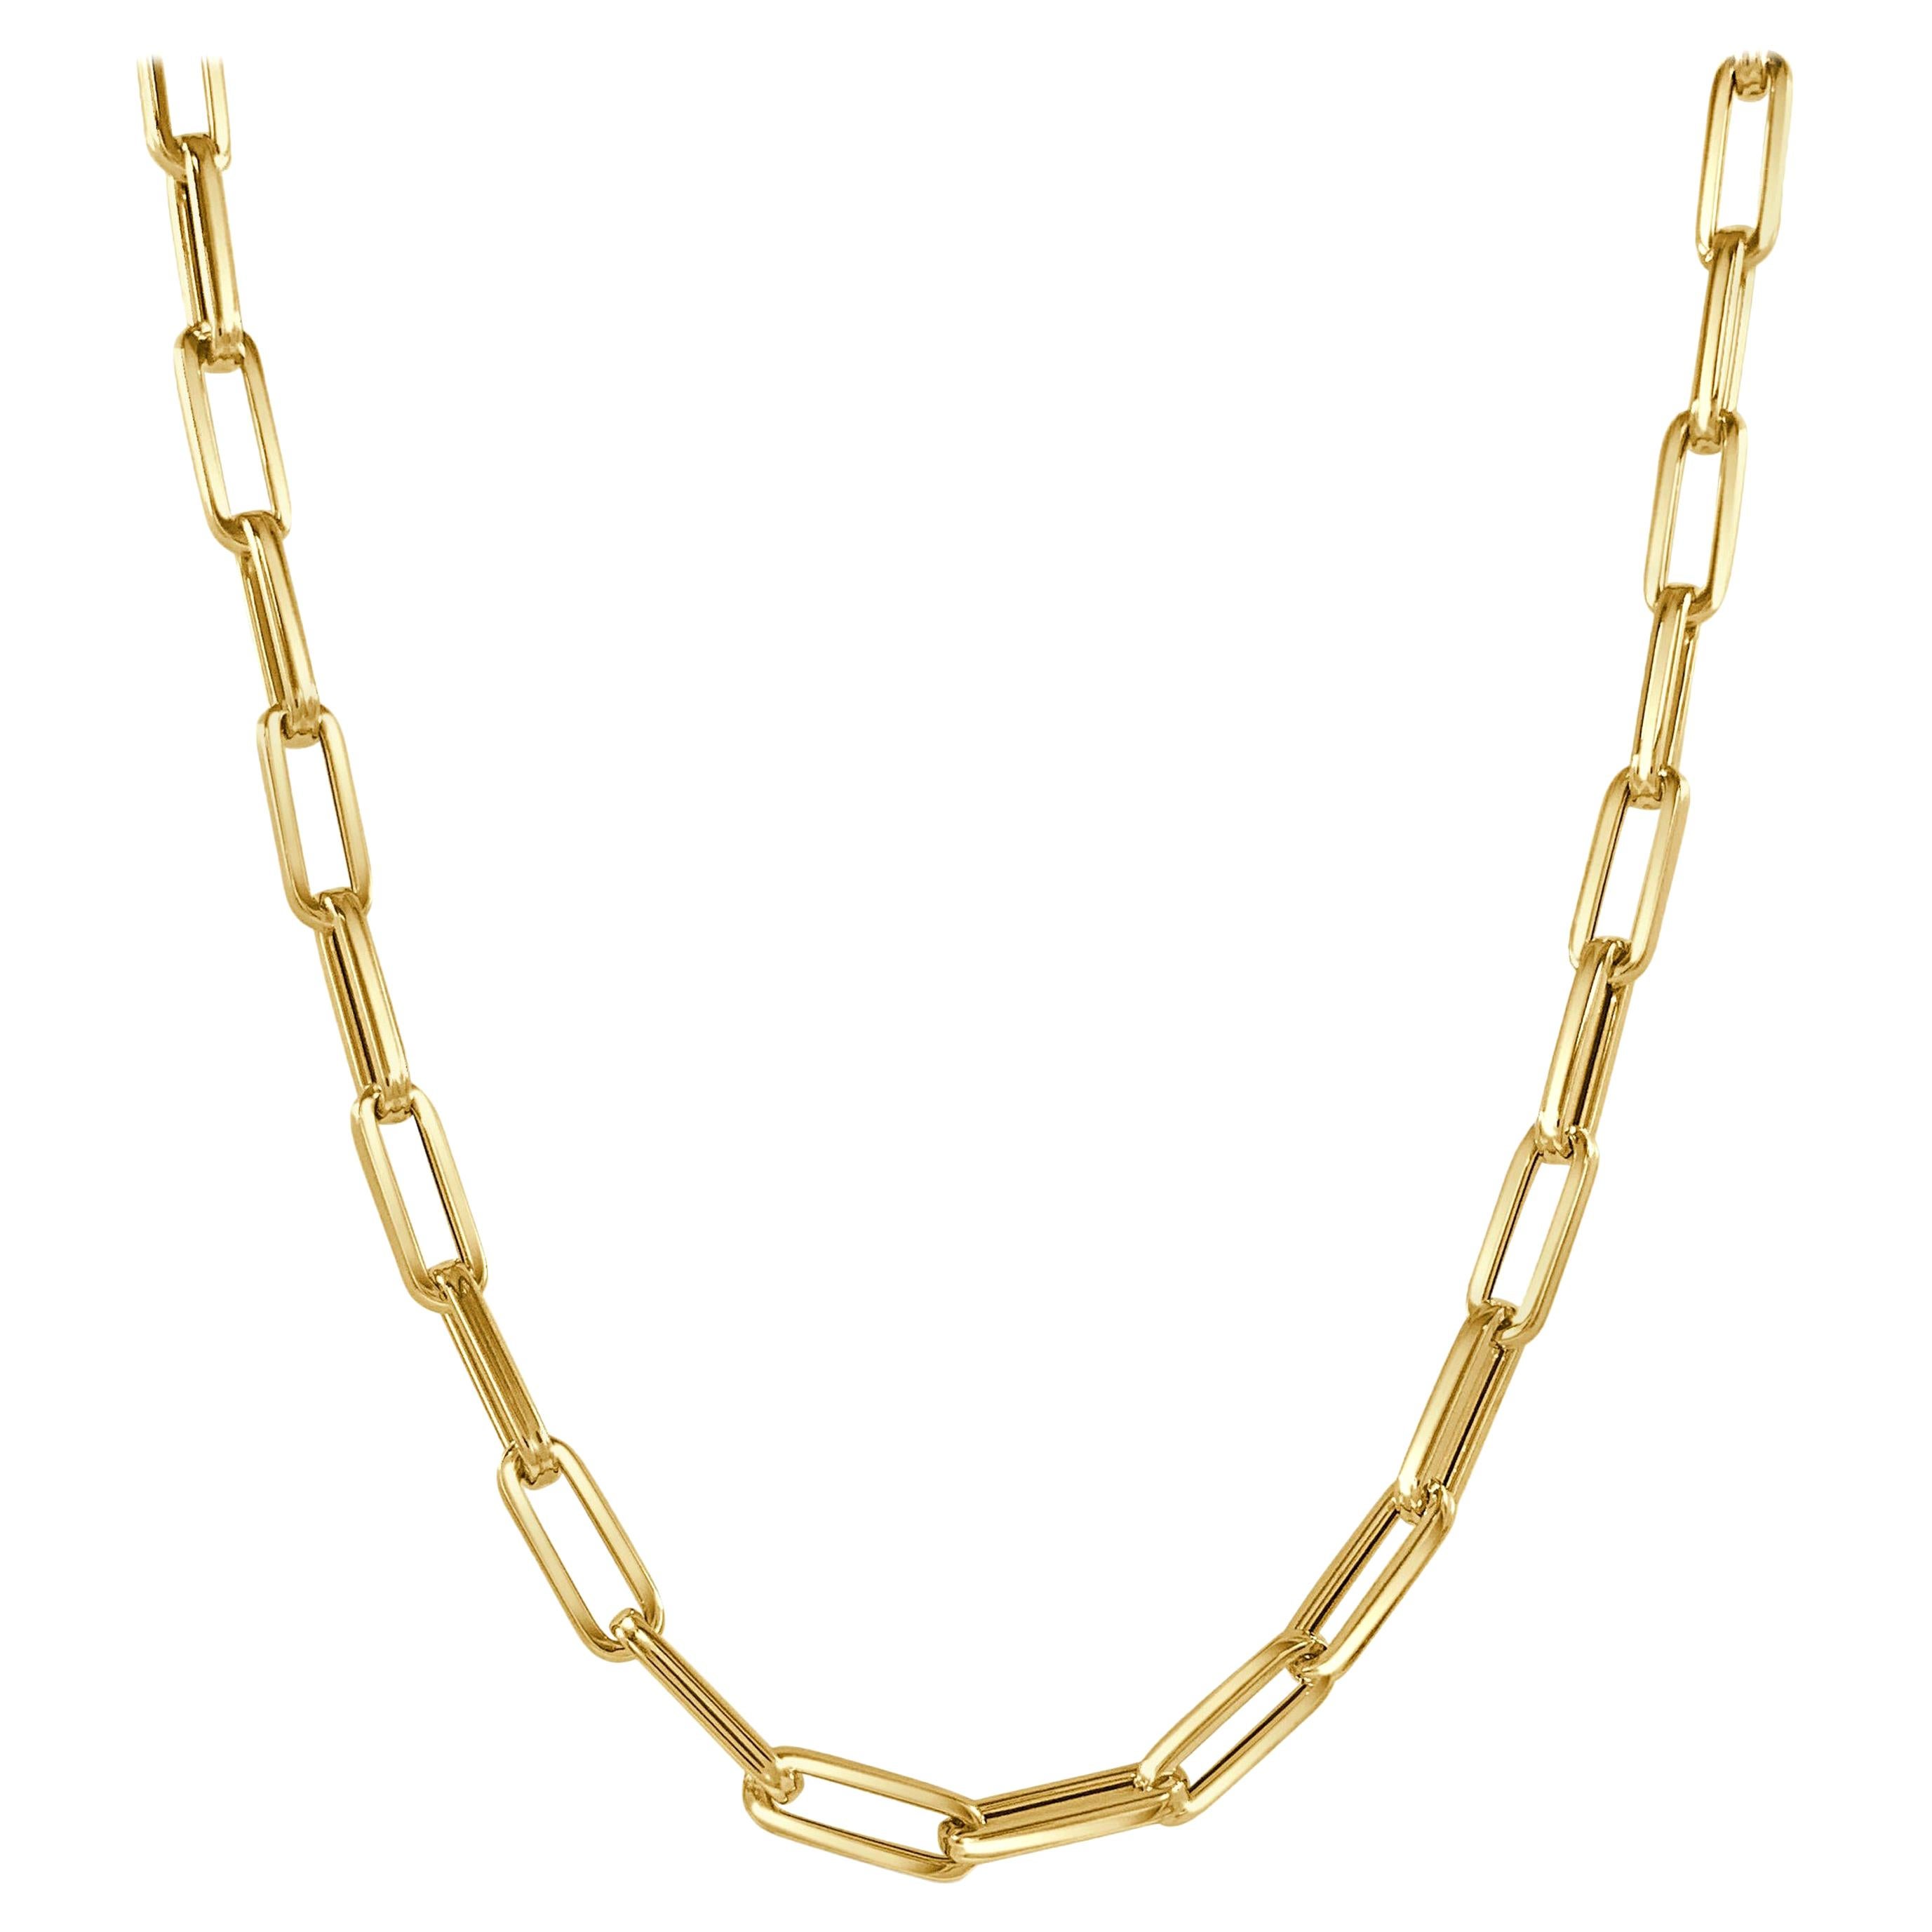 14 Karat Yellow Gold Paperclip Link Chain Necklace, Made in Italy